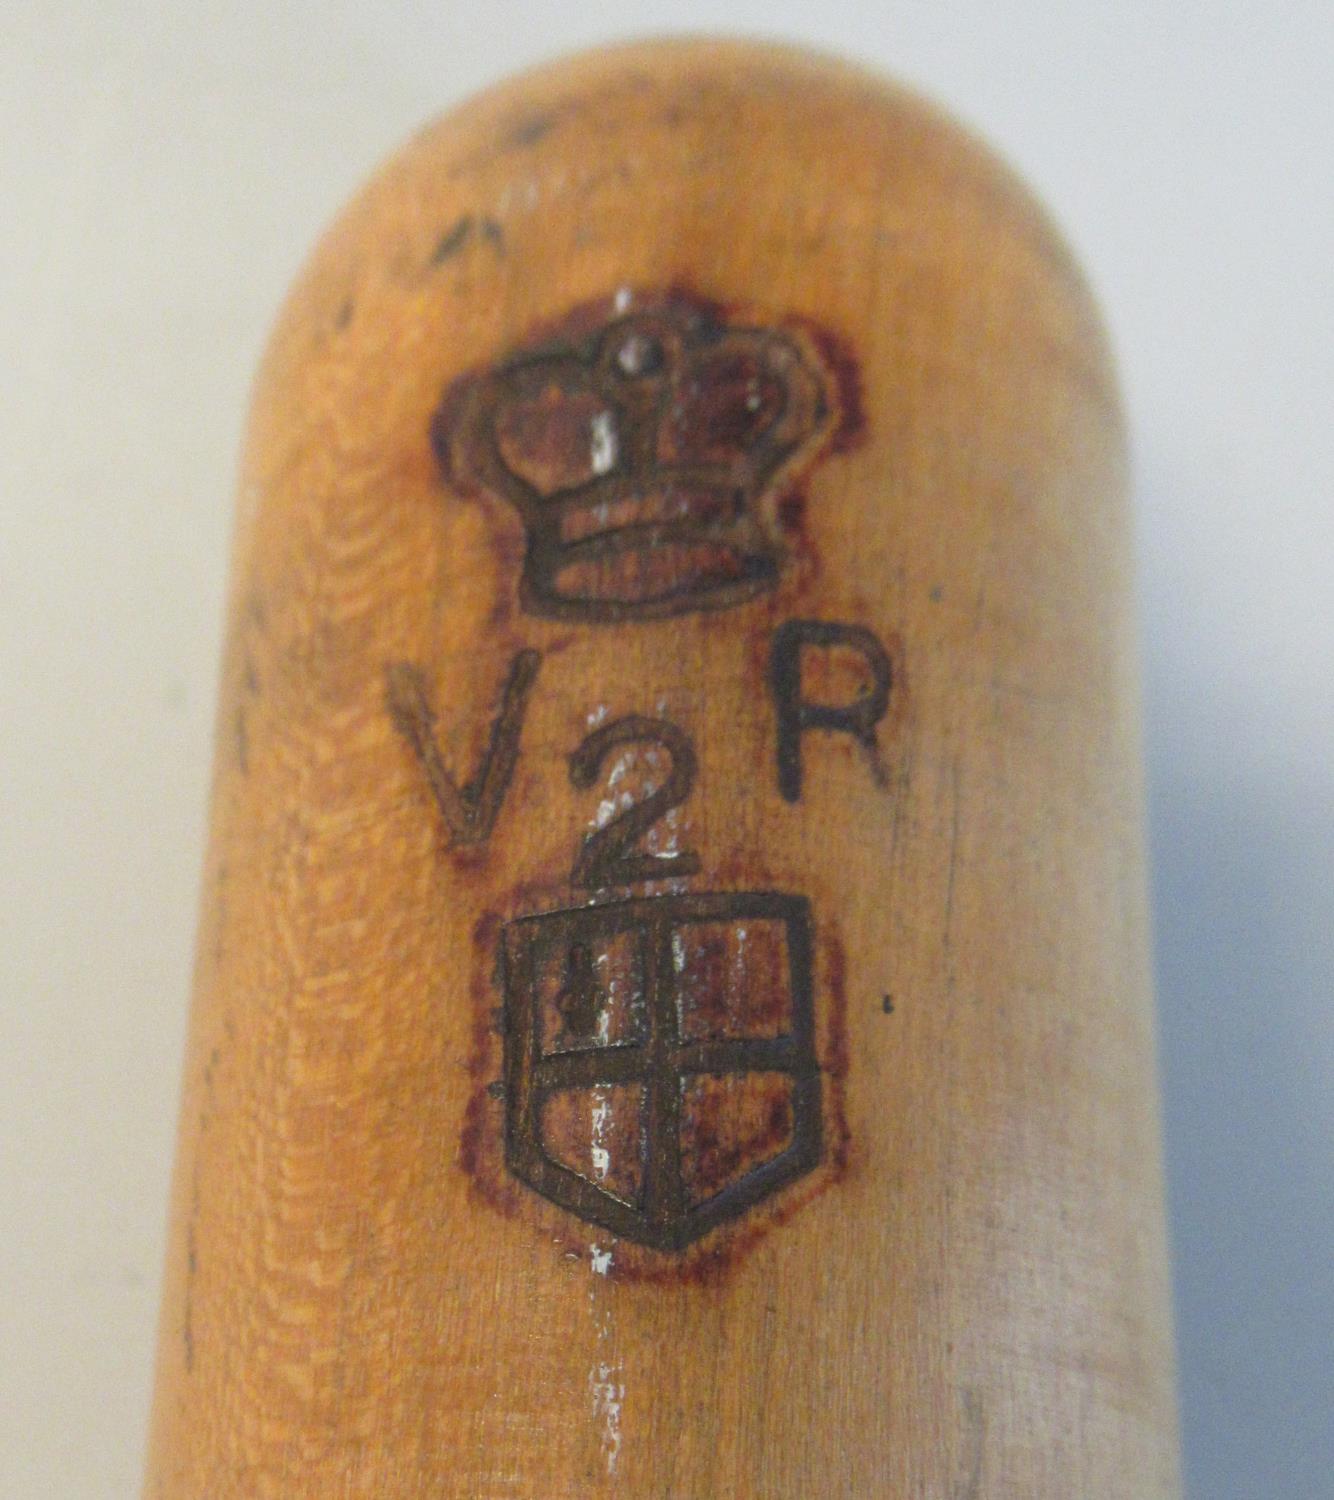 19th century Victorian beech turned wooden truncheon marked 'VR 2' with crown. (B.P. 21% + VAT) - Image 2 of 2